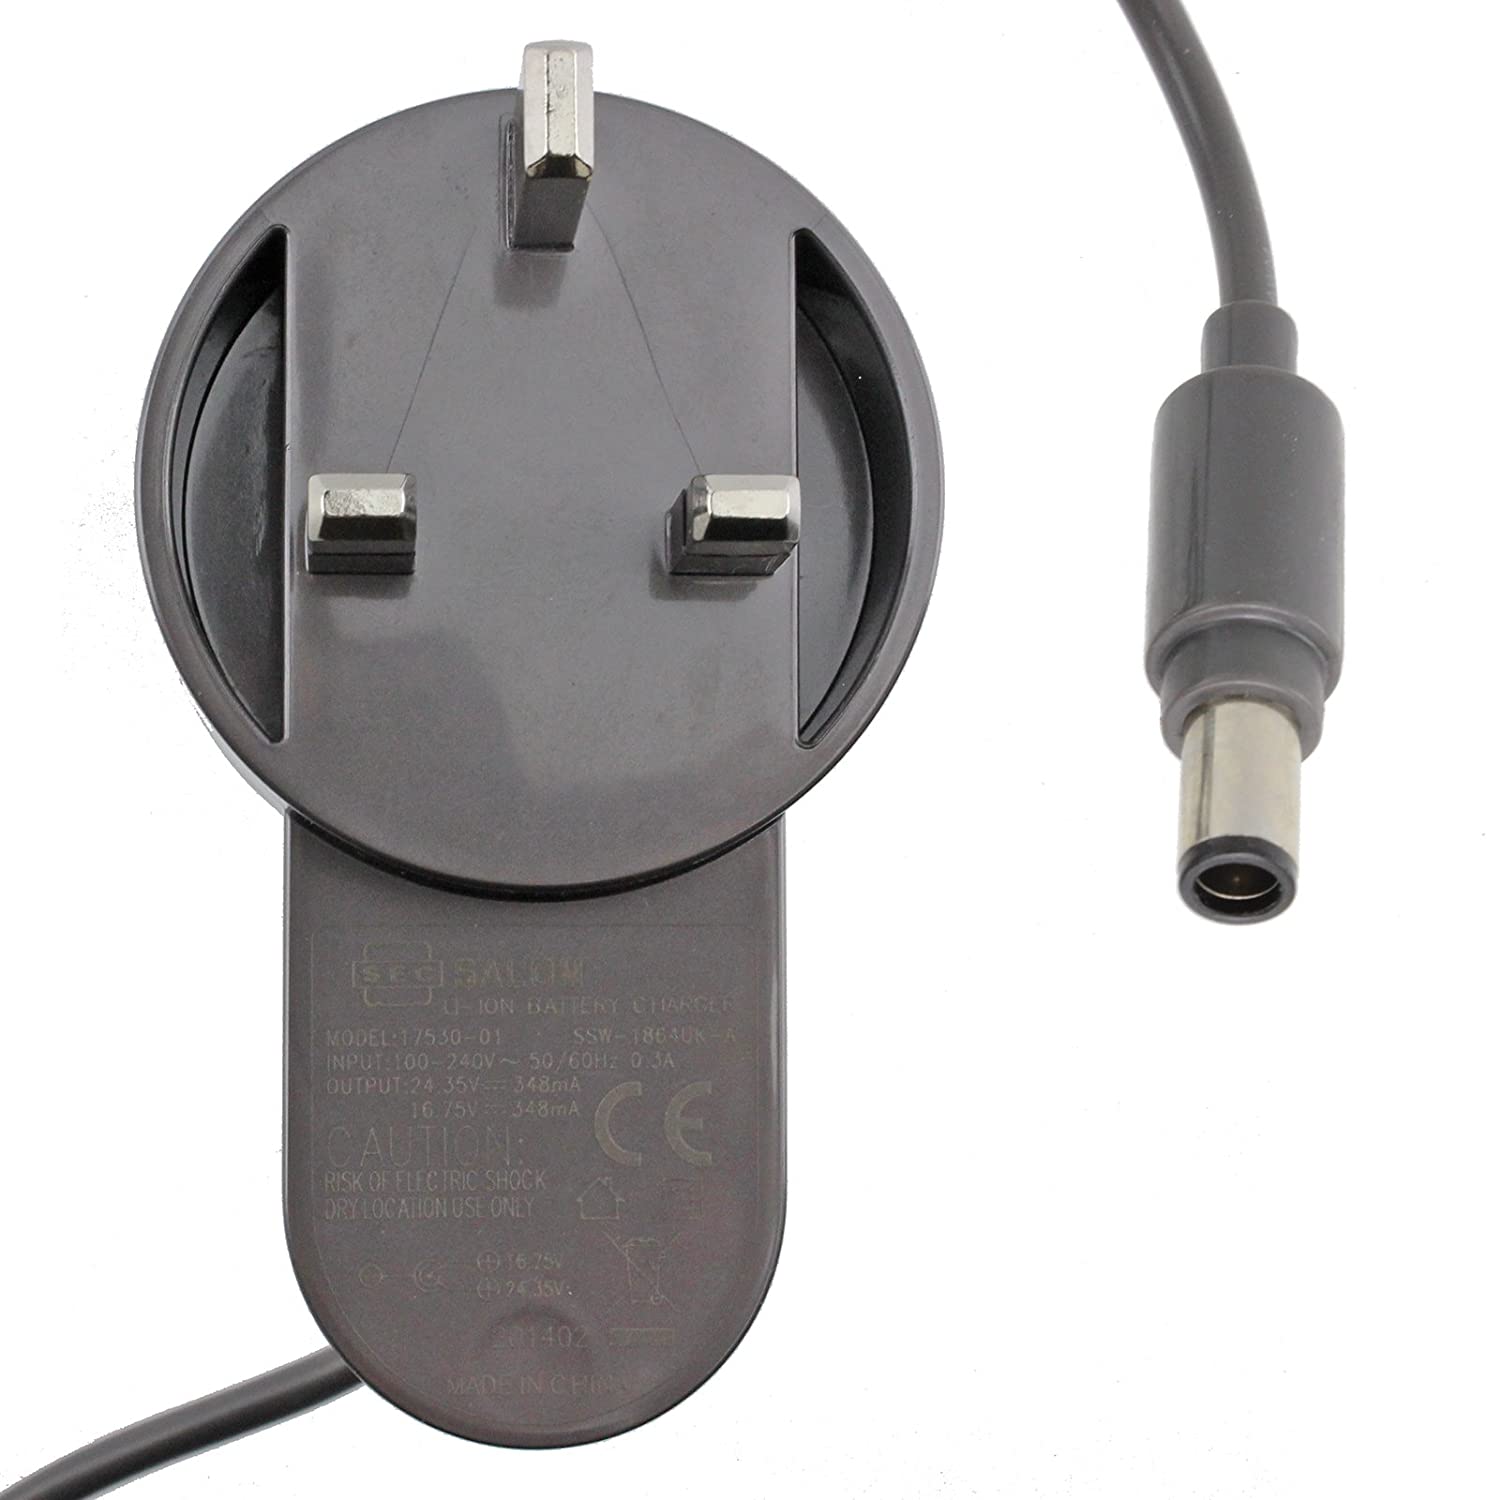 Battery Charger Plug Cable for Dyson DC34 Animal Vacuum Cleaner